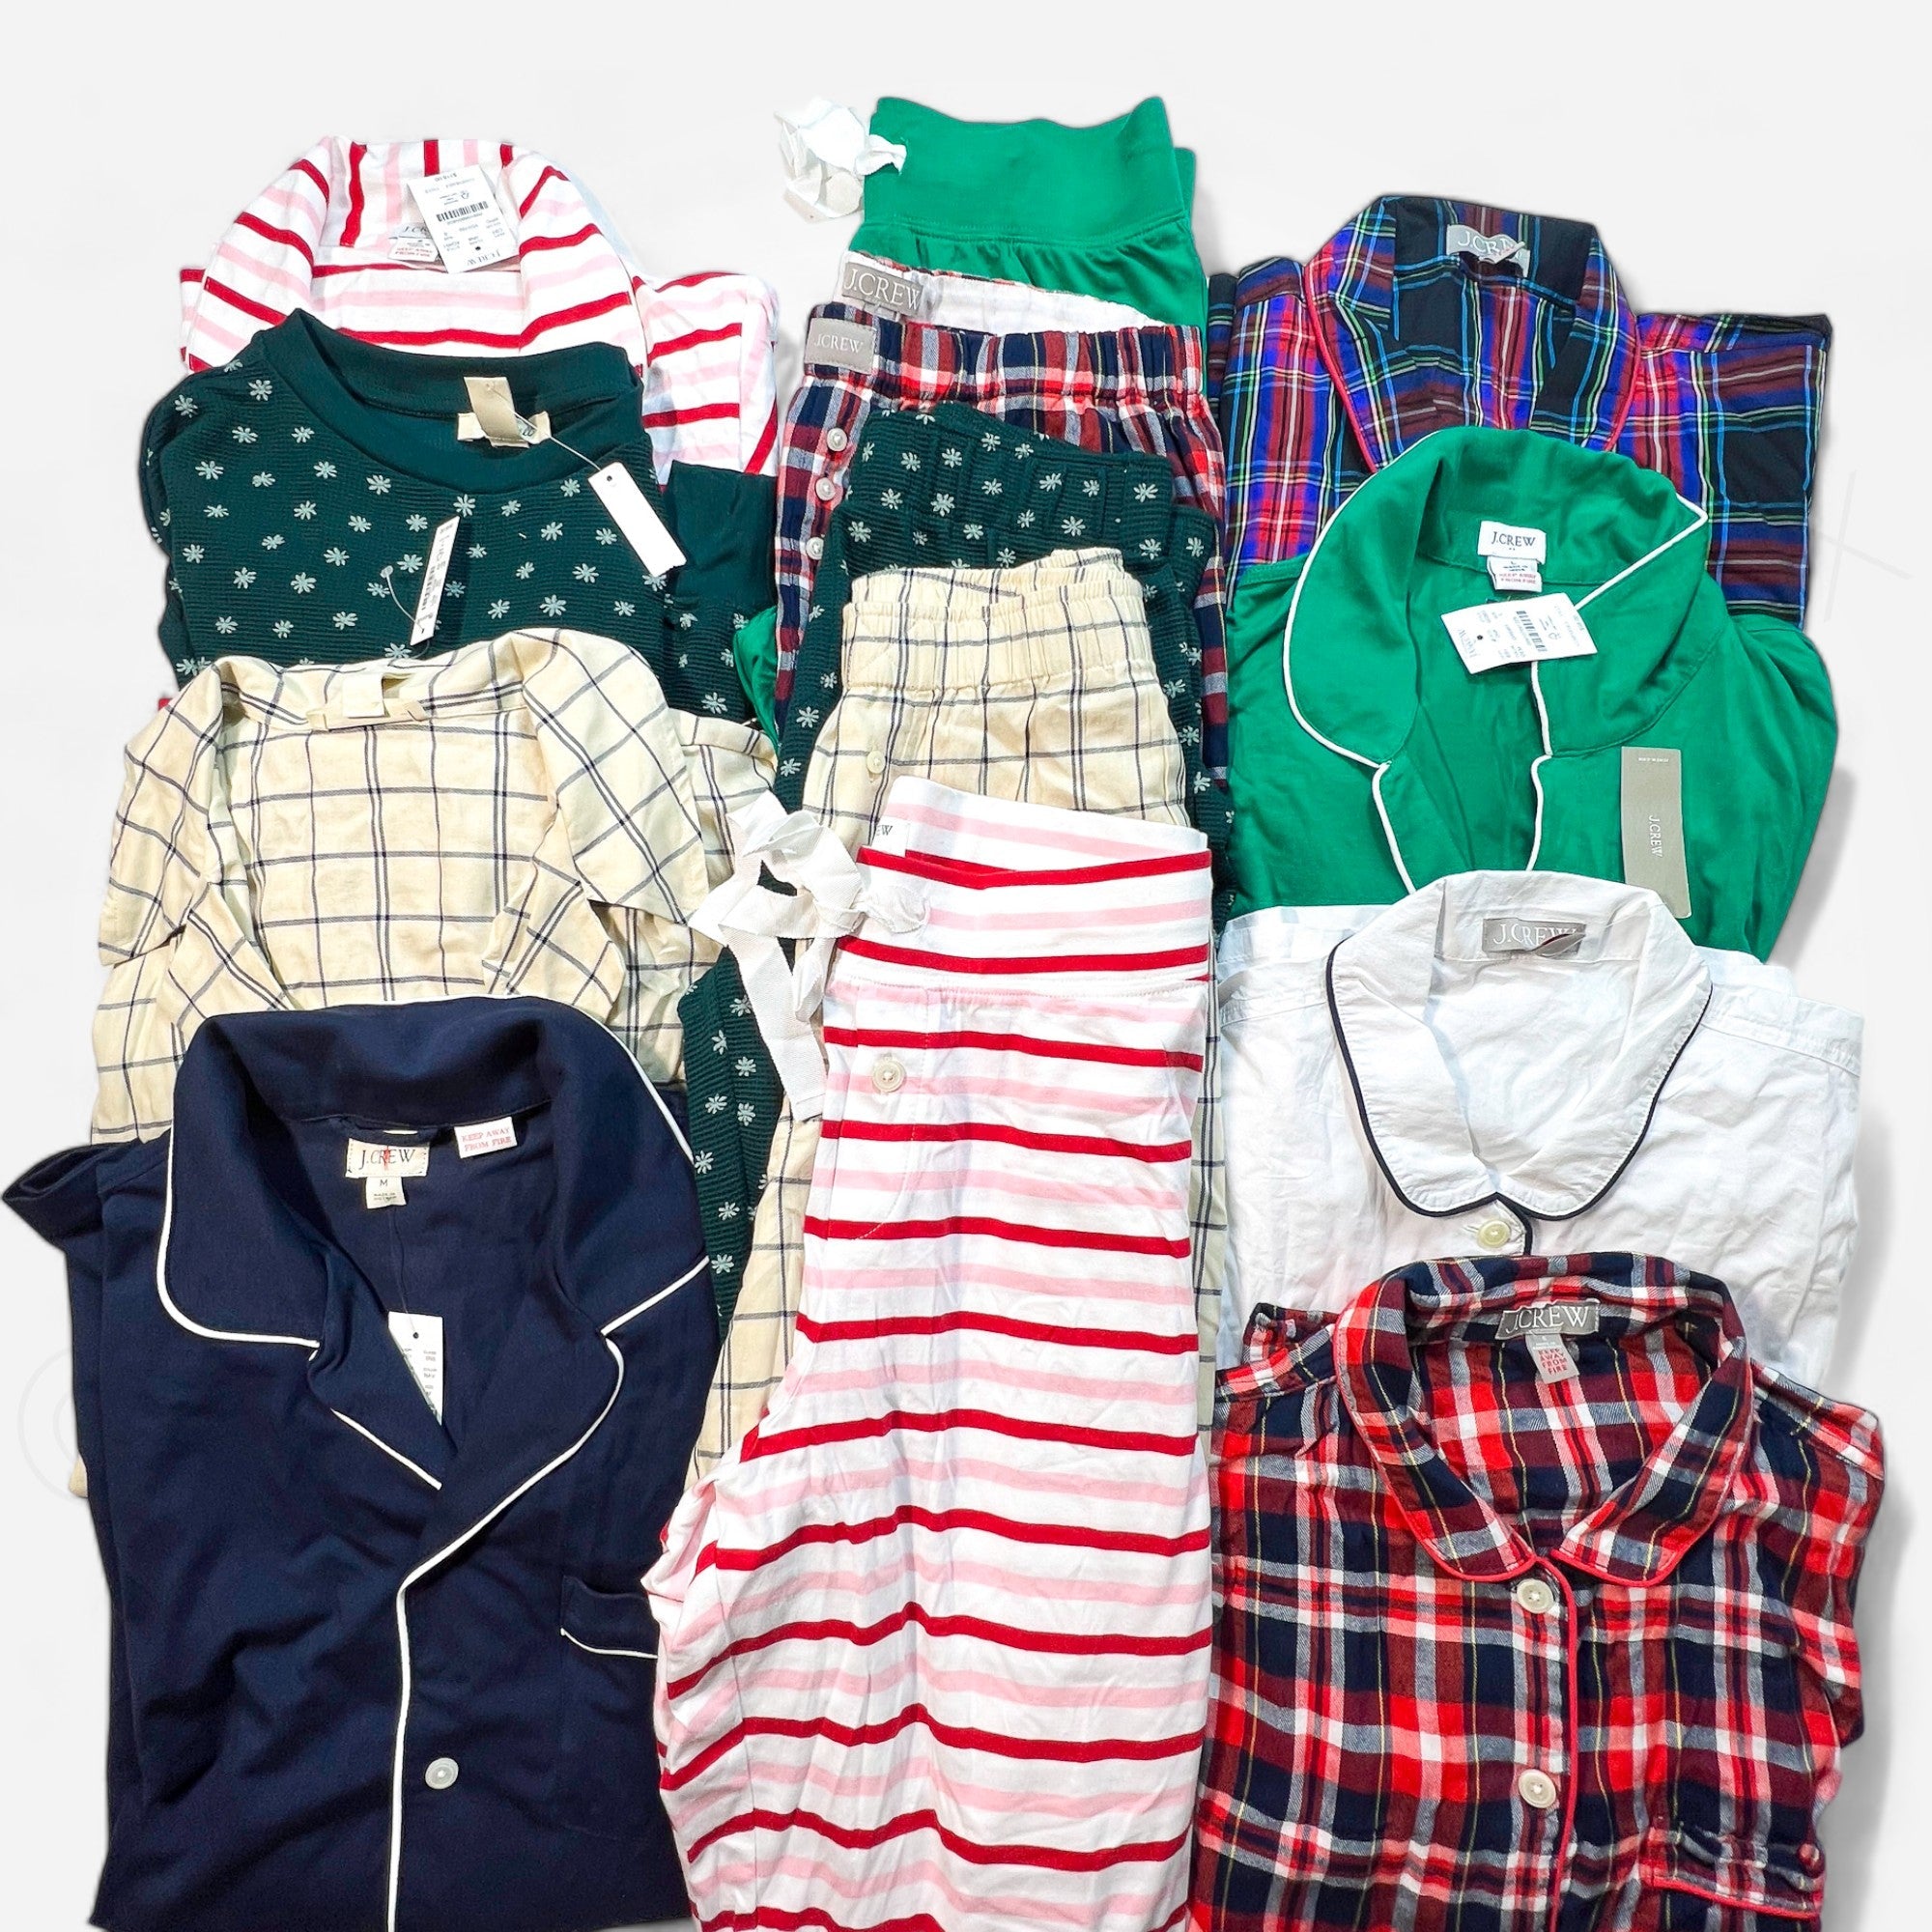 MDWLL + JCRW Sleepwear New/Returns Bulk Clothing 43 units - Boutique by the Box Wholesale for Resellers